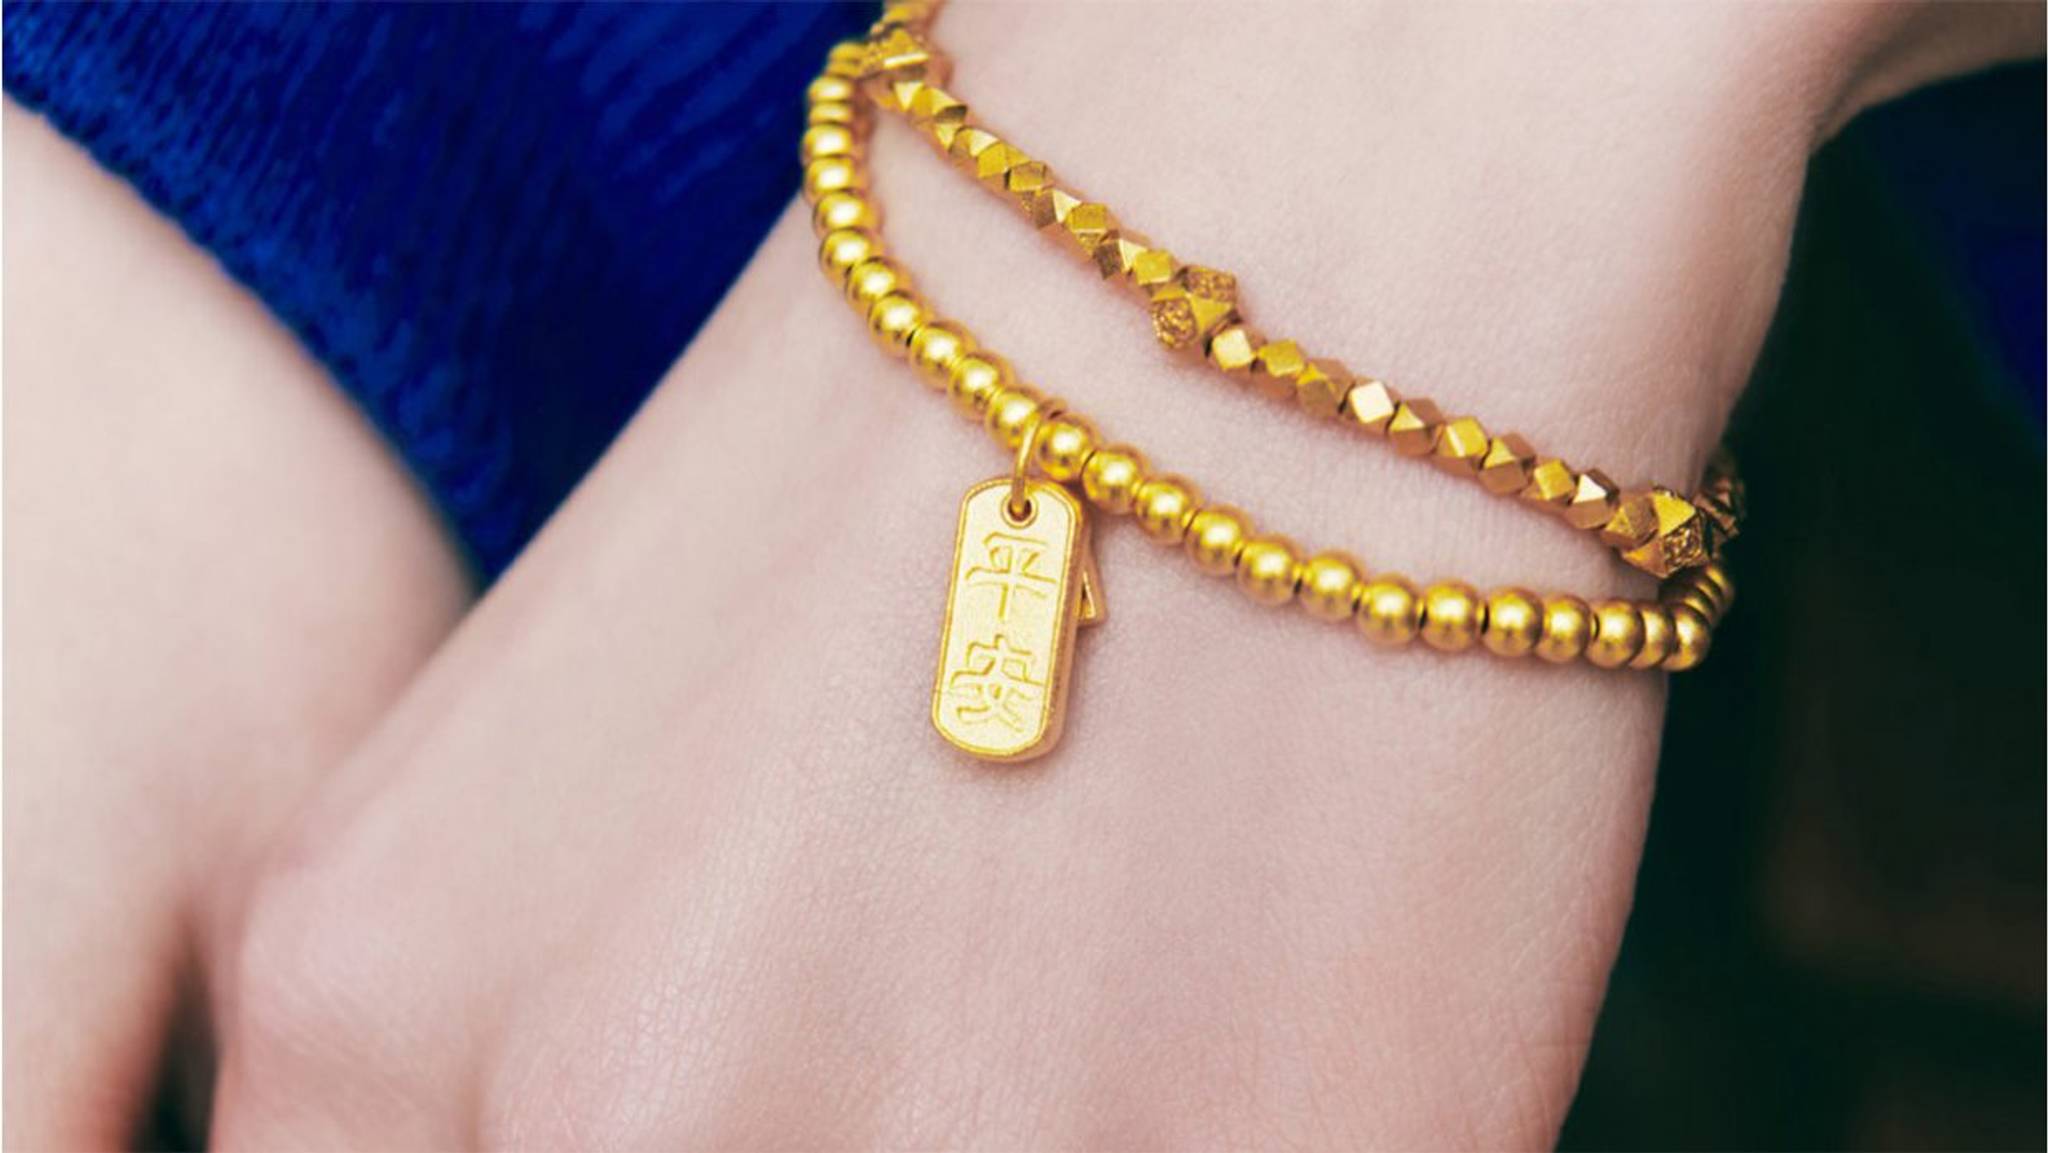 Young Chinese pay homage to heritage through gold